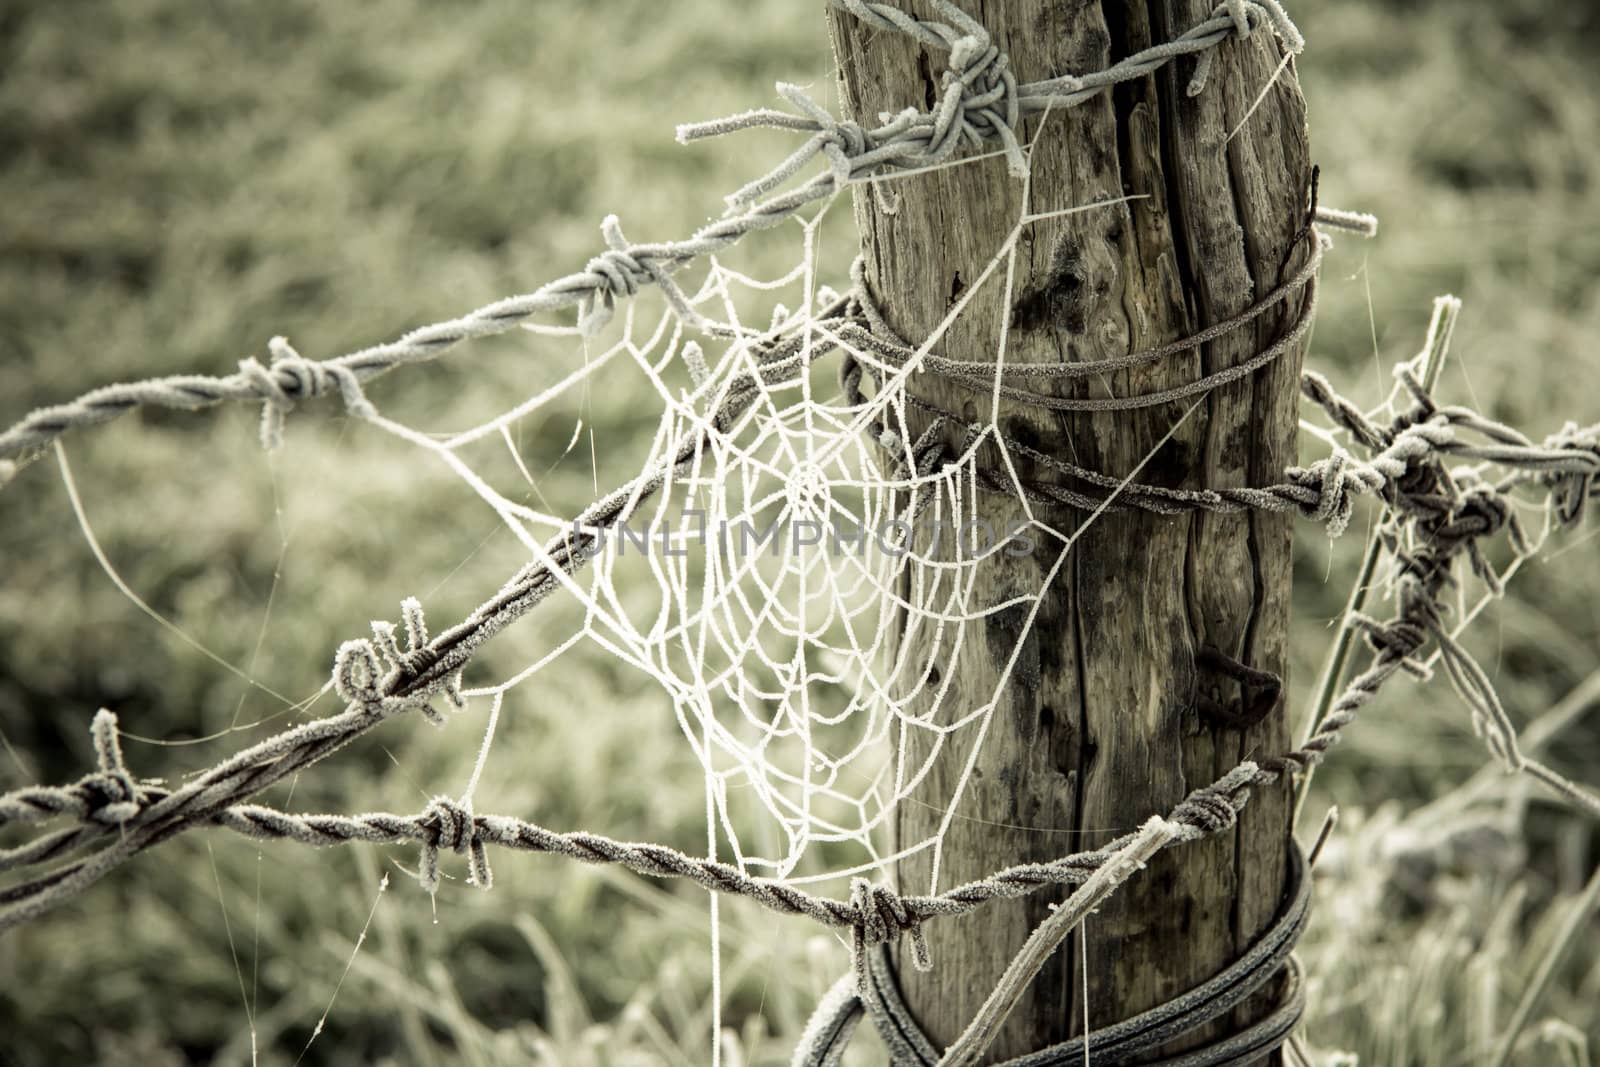 Spiderweb frozen and barbed wire frozen in a wooden trunk on green grass field background